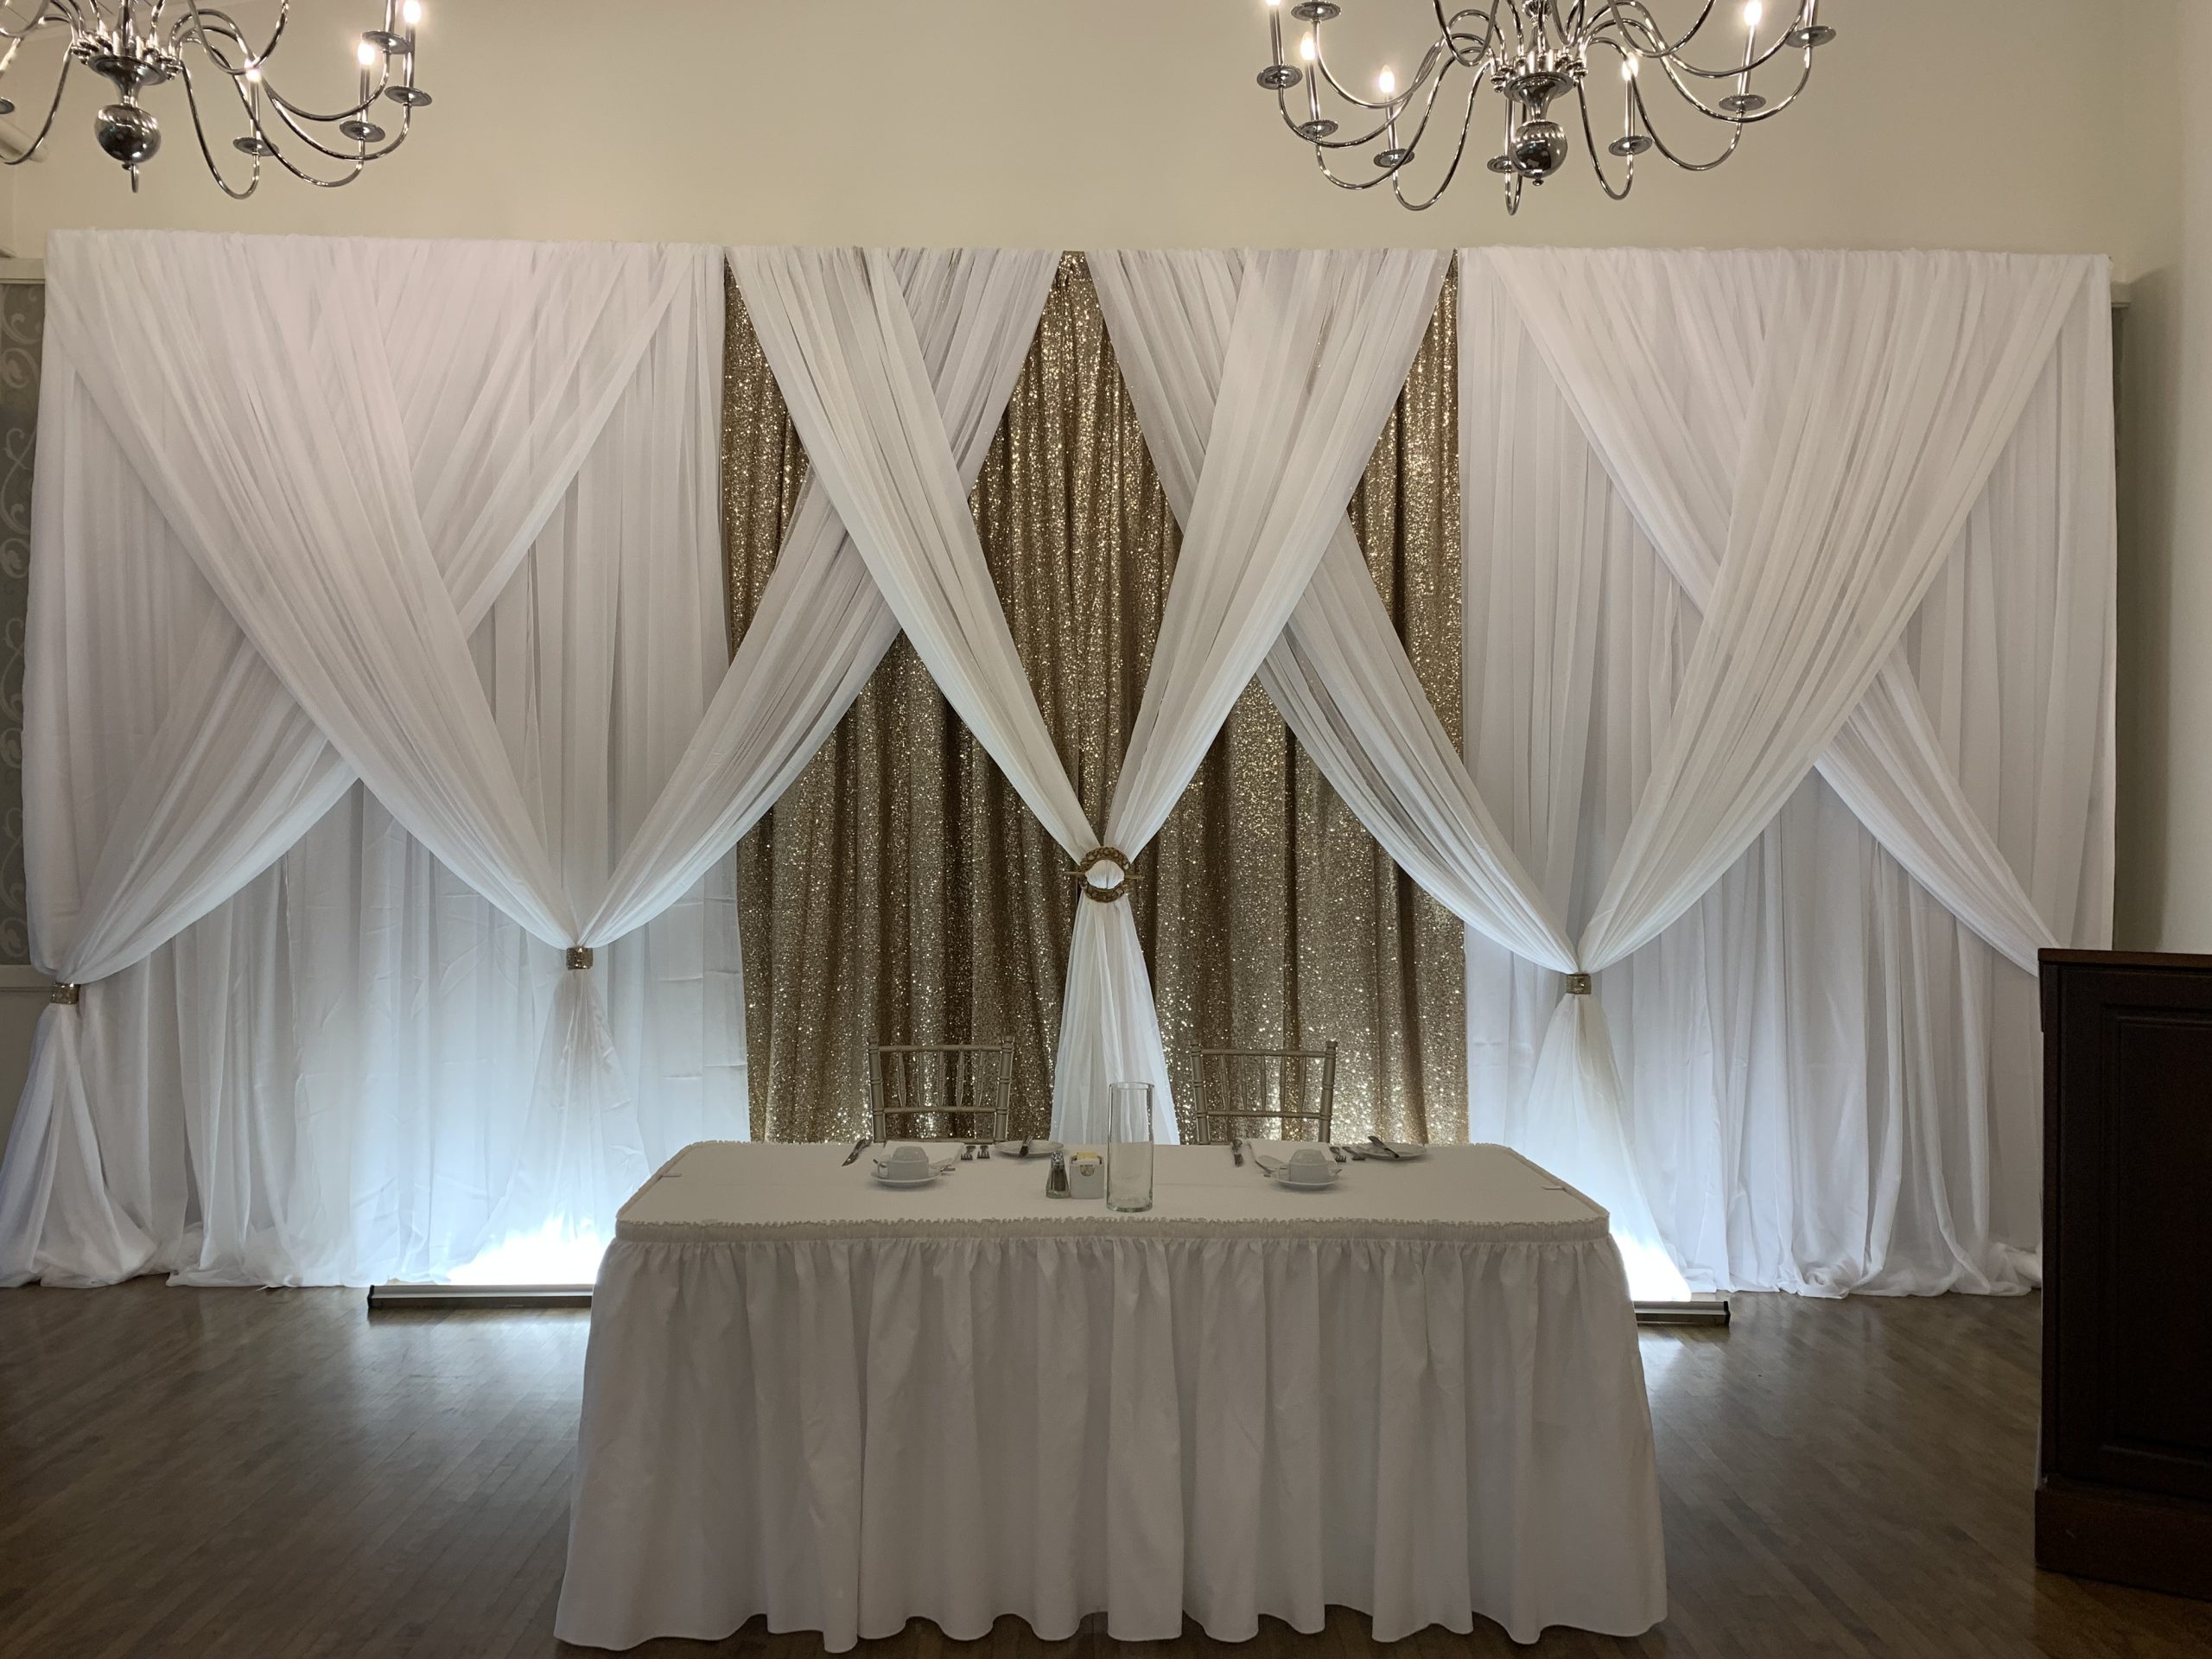 White and gold backdrop and table rentals used as a head table during a wedding reception.